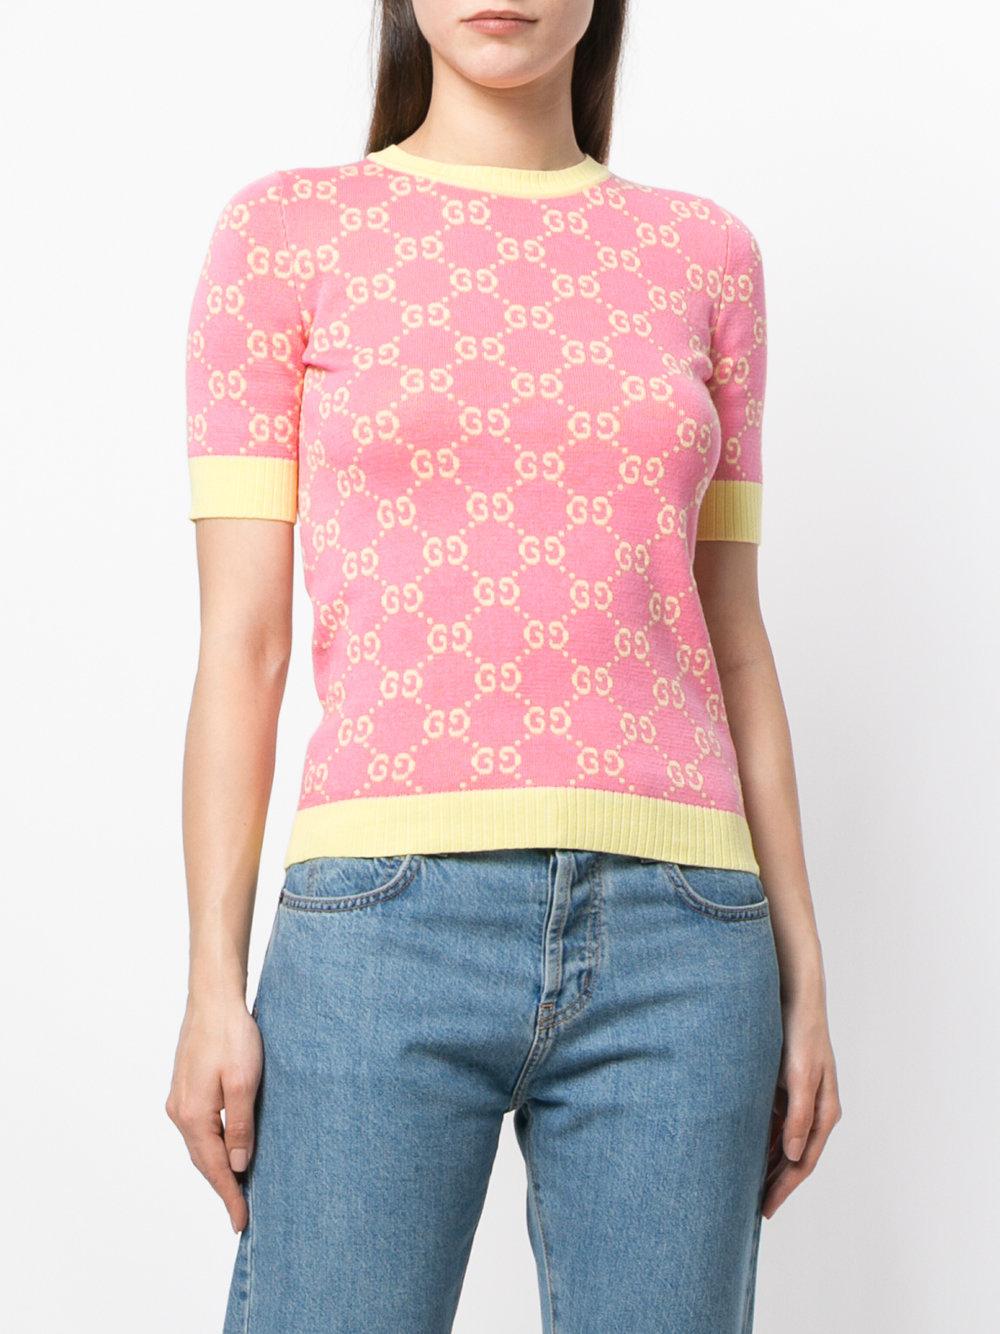 Gucci Wool Gg Jacquard Knitted Top in Pink & Purple (Pink) - Lyst